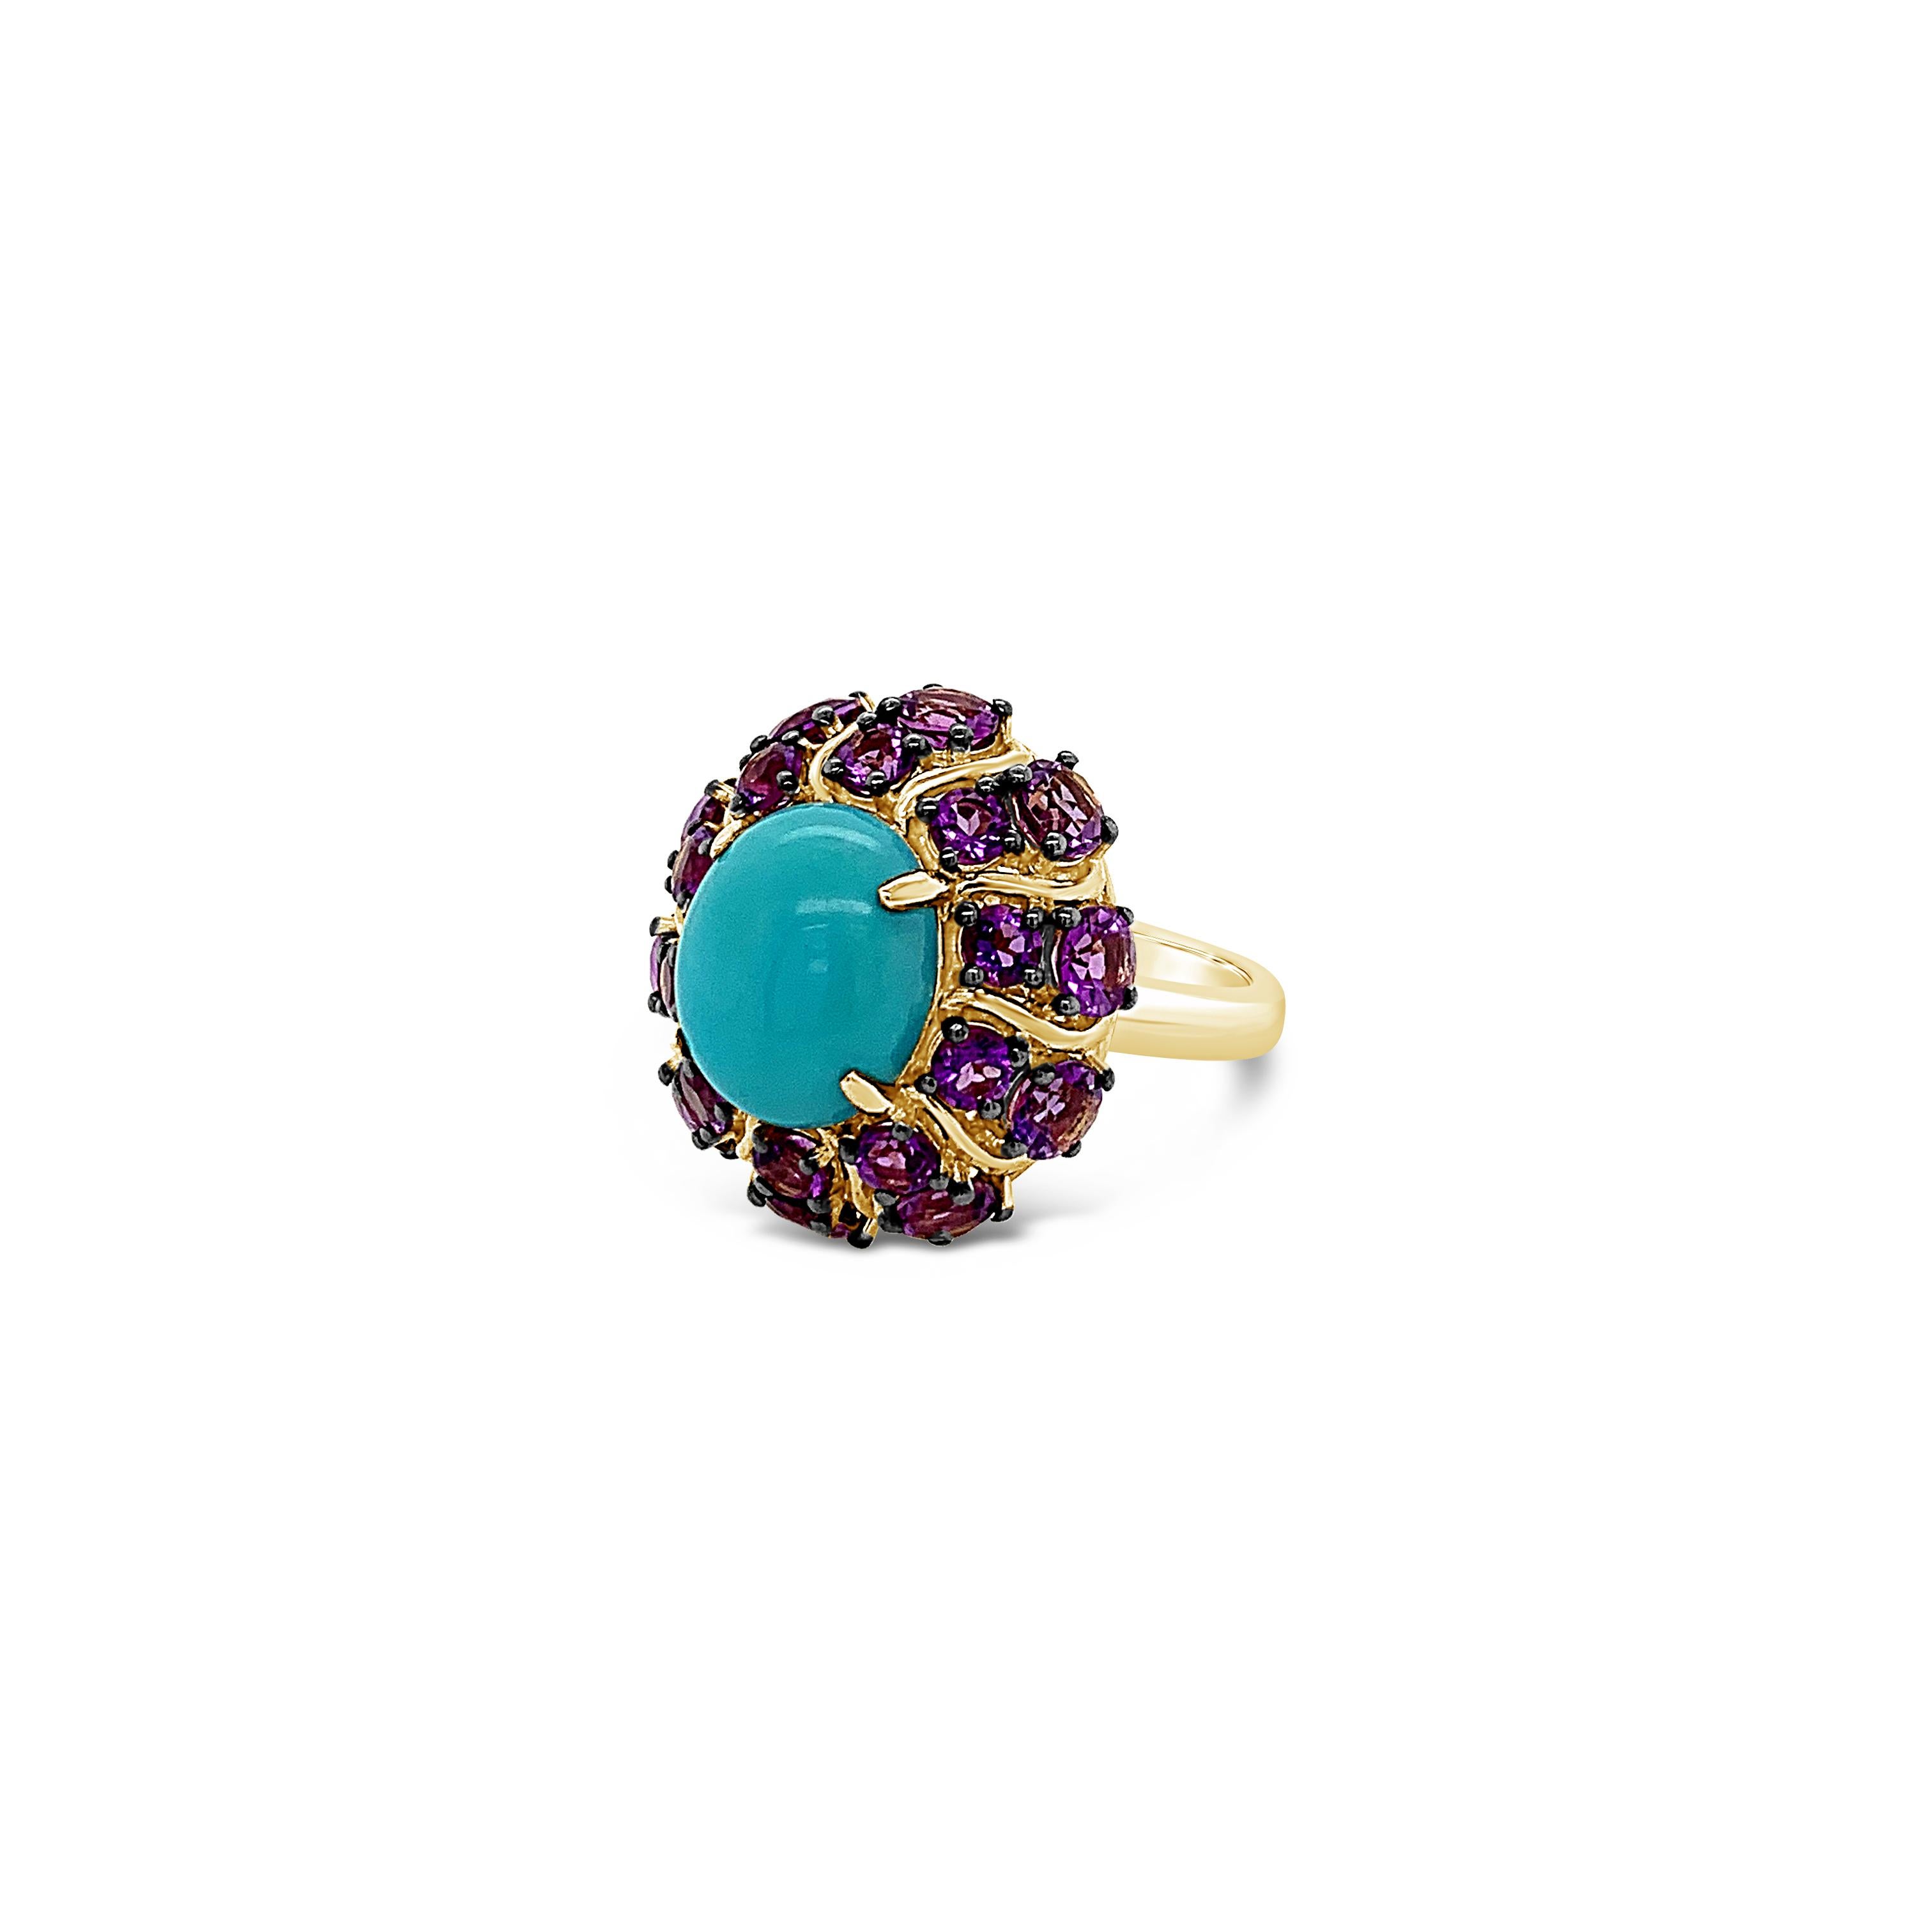 Carlo Viani® Ring featuring 3 1/2 cts. Robins Egg Blue Turquoise™, 3 1/4 cts. Grape Amethyst™, set in 14K Honey Gold™

Diamonds Breakdown:
None

Gems Breakdown:
3 1/2 cts Turquoise
3 1/3 cts Amethyst

Please feel free to reach out with any